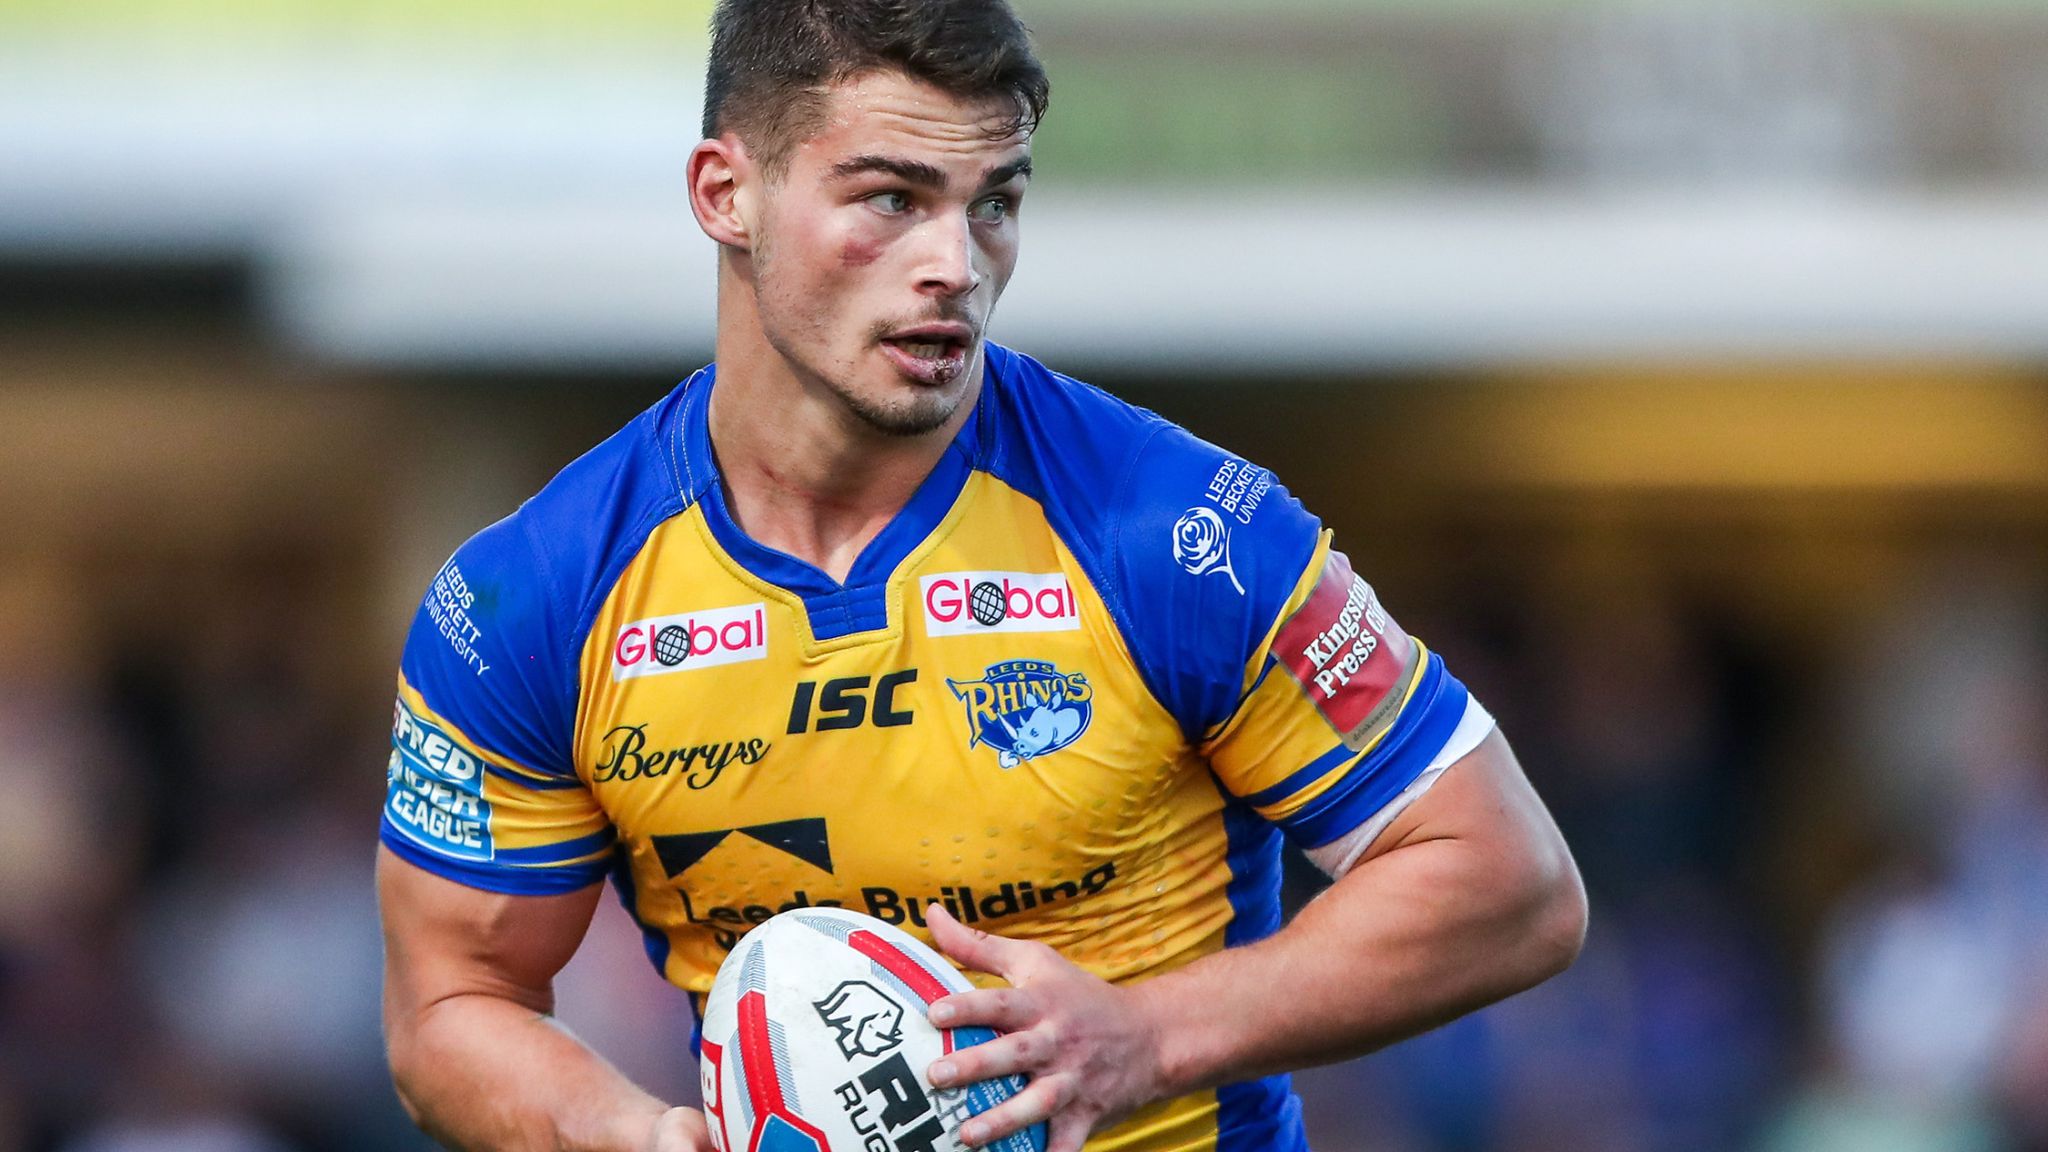 Leeds United star vows to attend Rhinos games after taste of rugby league